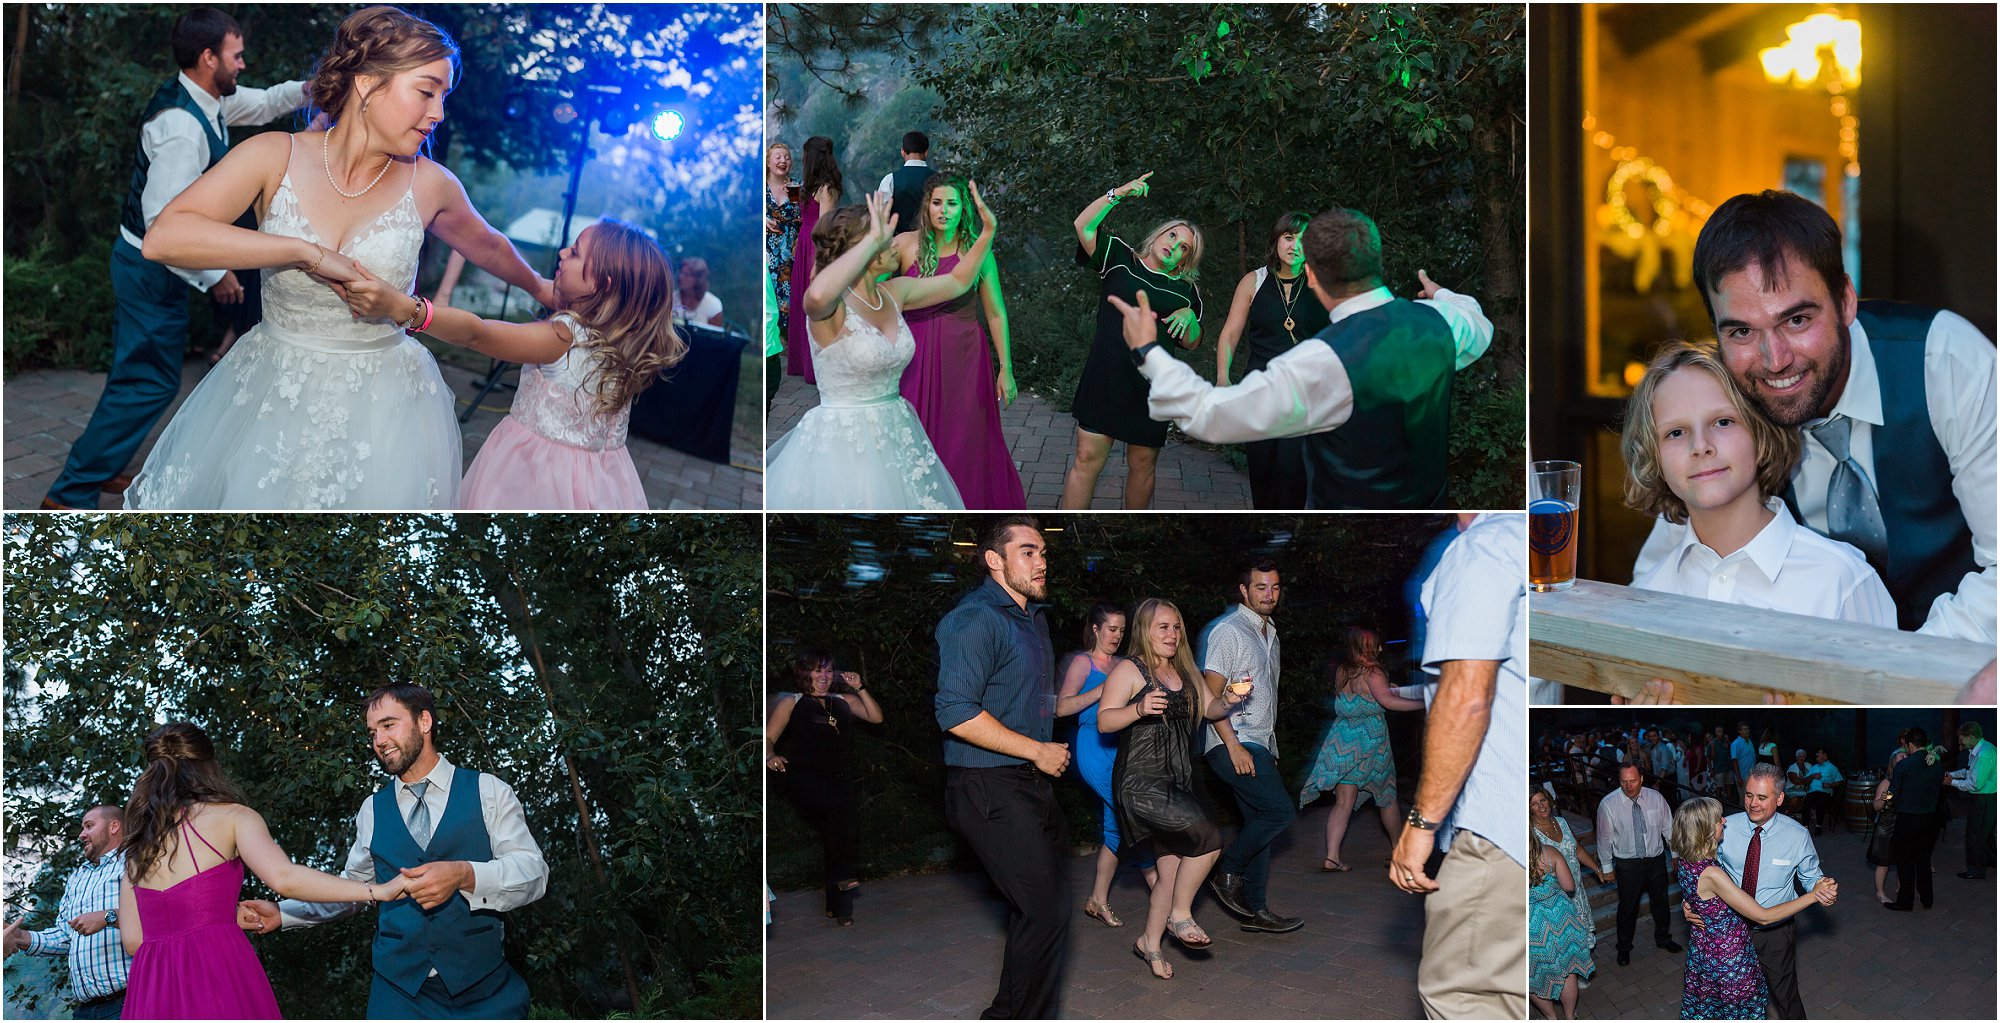 Time to dance and party the night away at this Bend, OR wedding. | Erica Swantek Photography